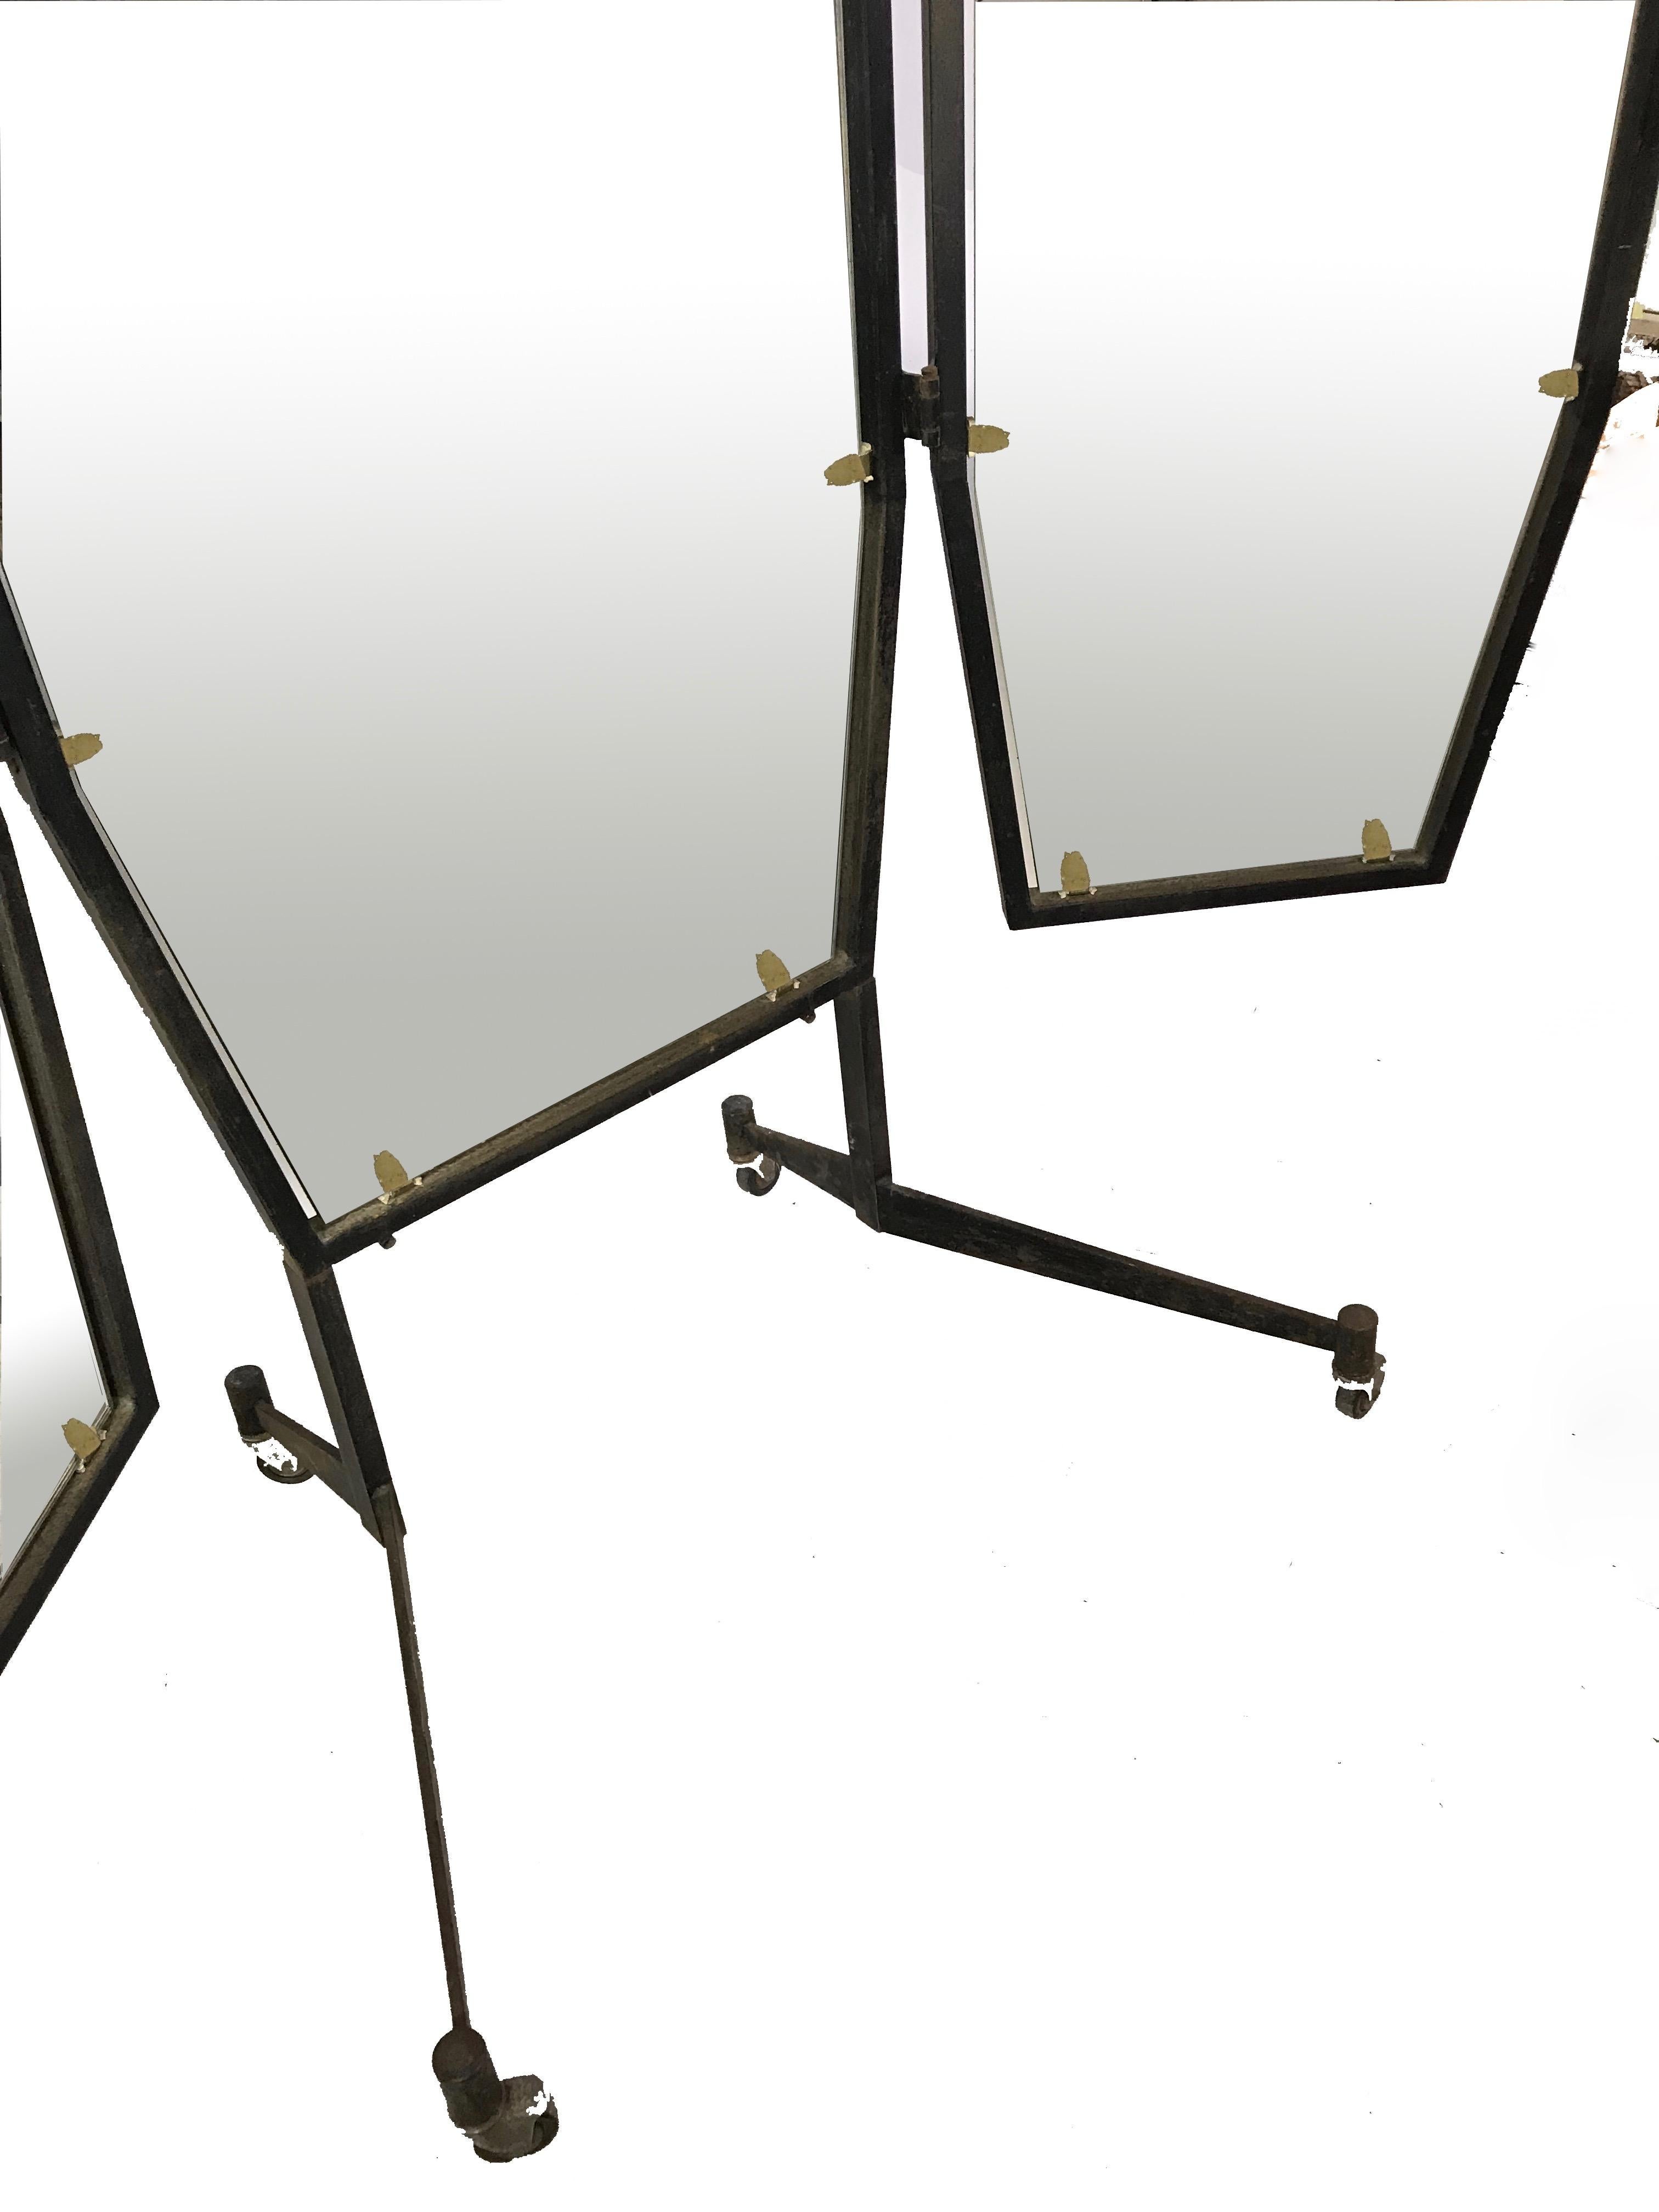 20th Century Italian Trifold Mirror on Casters